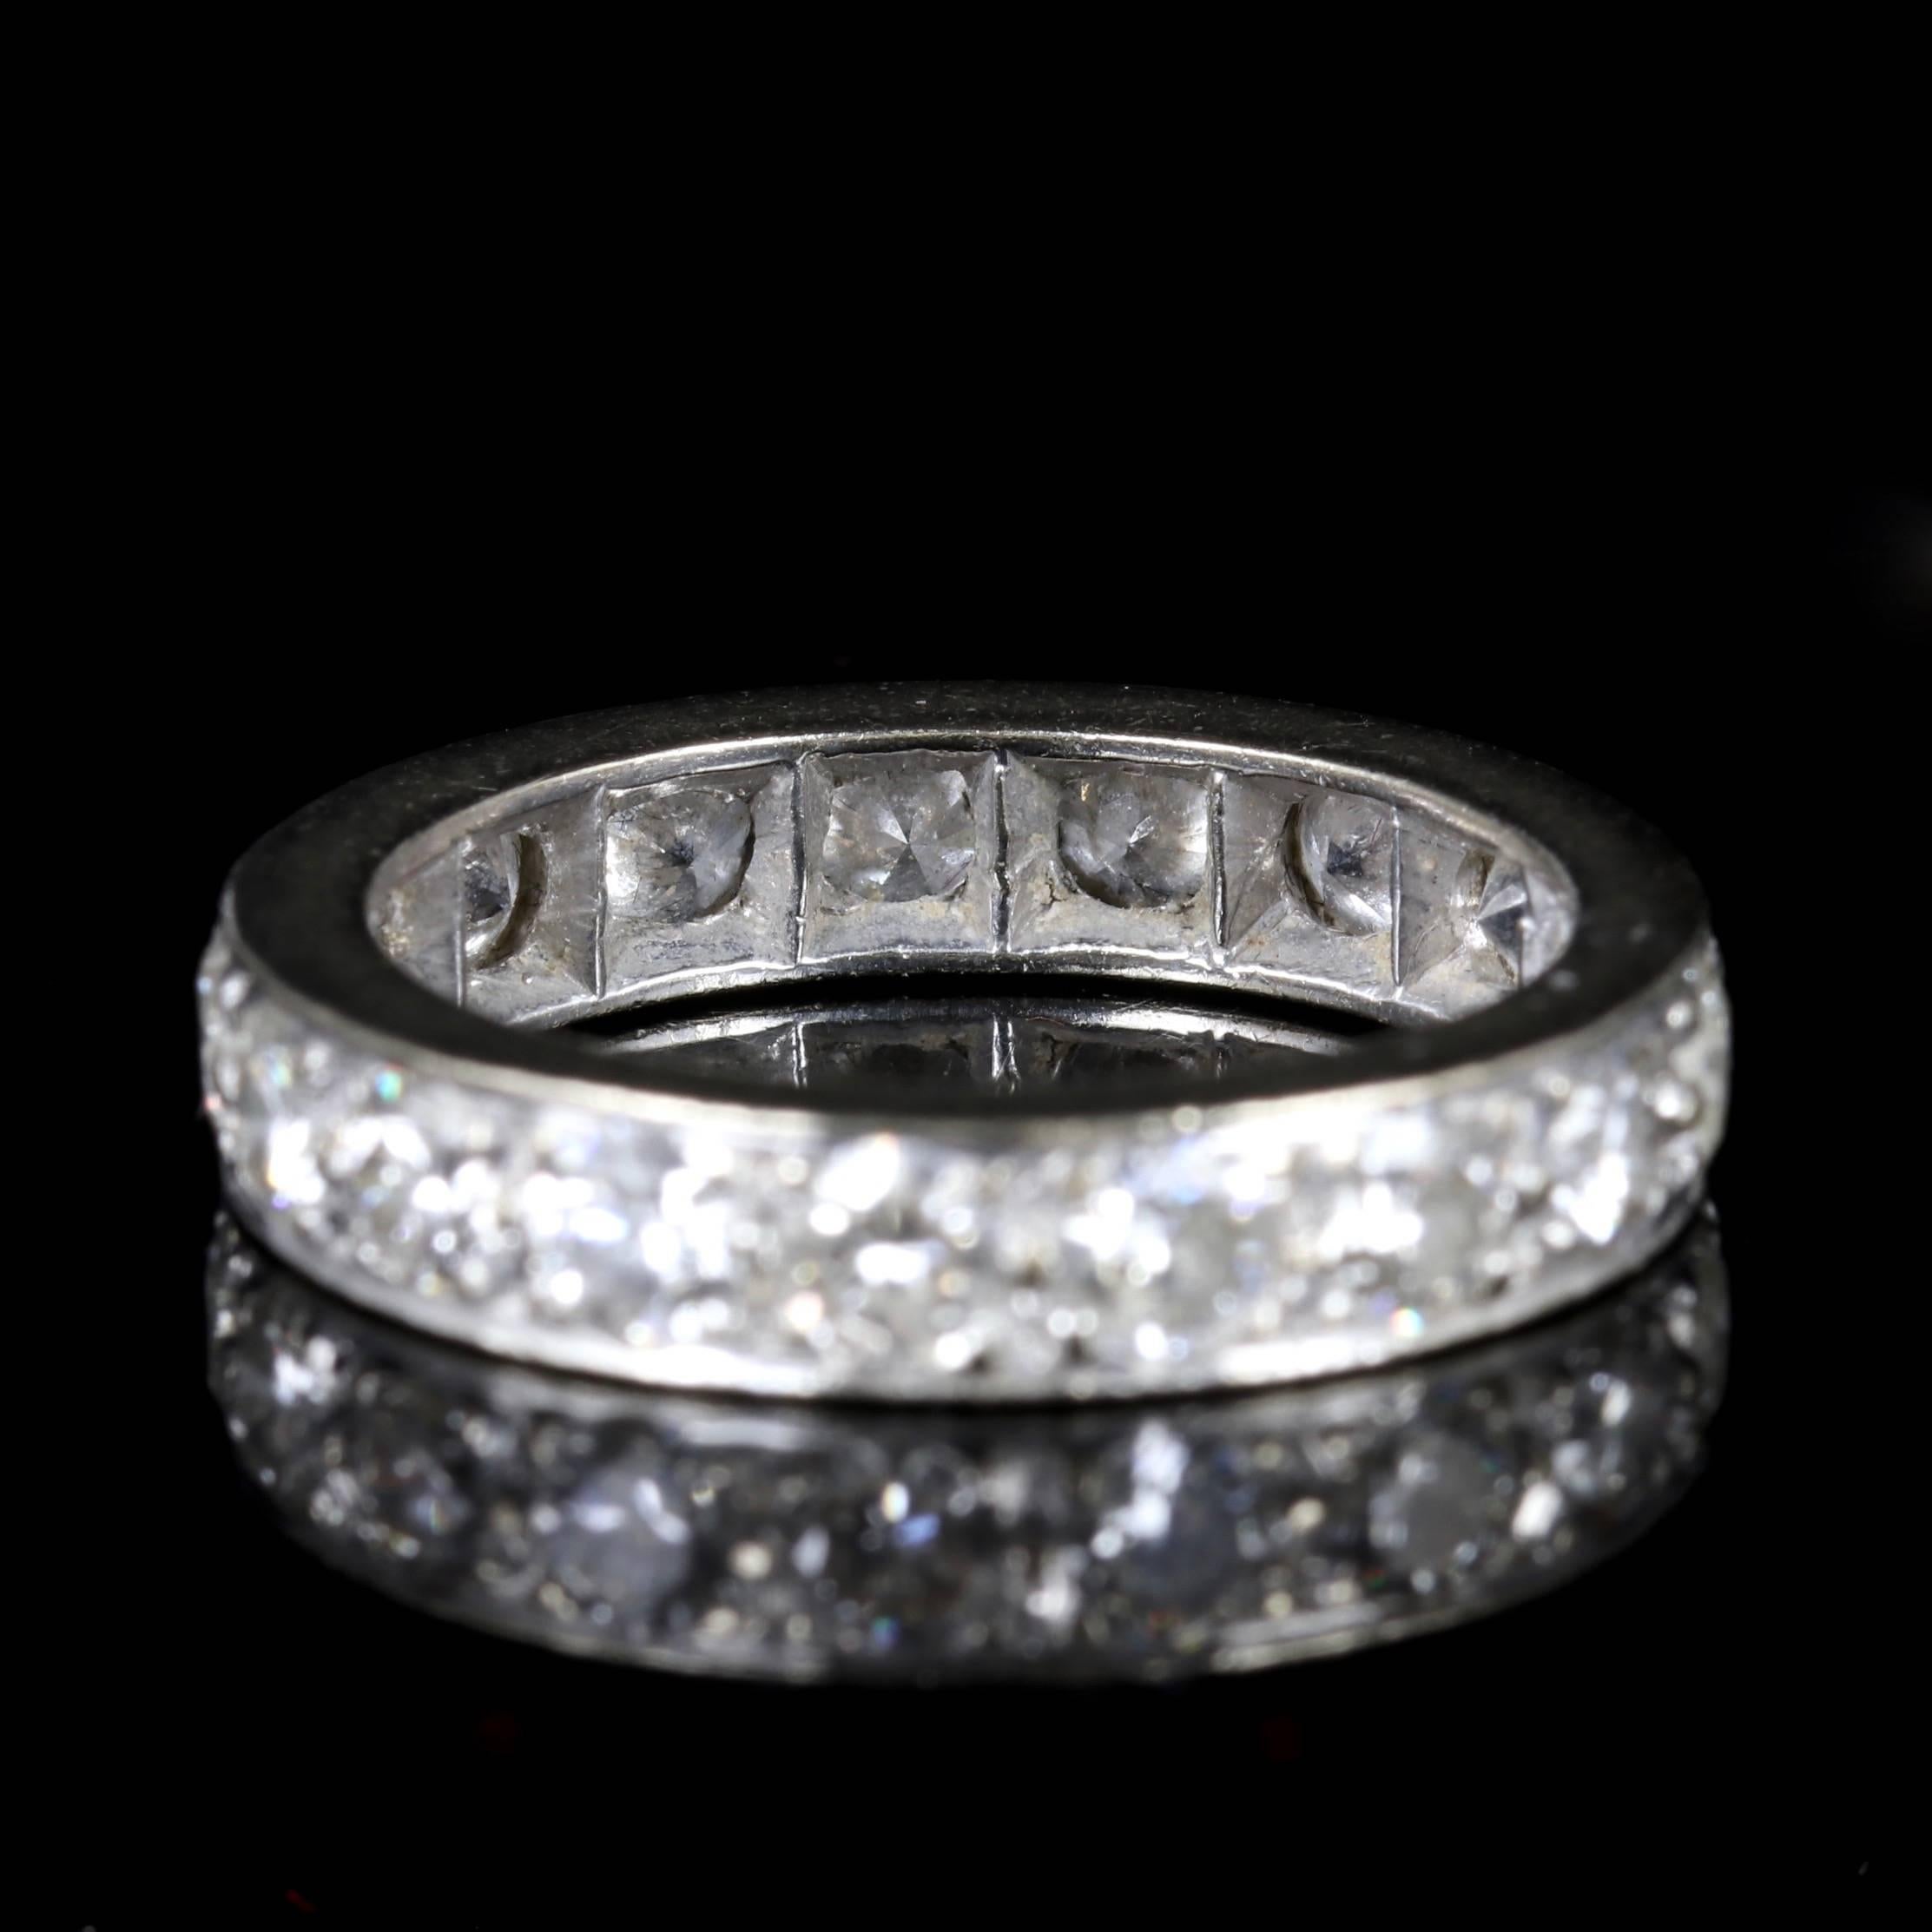 This fabulous Edwardian Diamond eternity ring is set in Platinum, Circa 1915

There are 17 glistening Diamonds in total, each of them being 0.18ct which totals up to 3.06ct of Diamonds on this fabulous ring.

The ring is Edwardian but the Diamonds